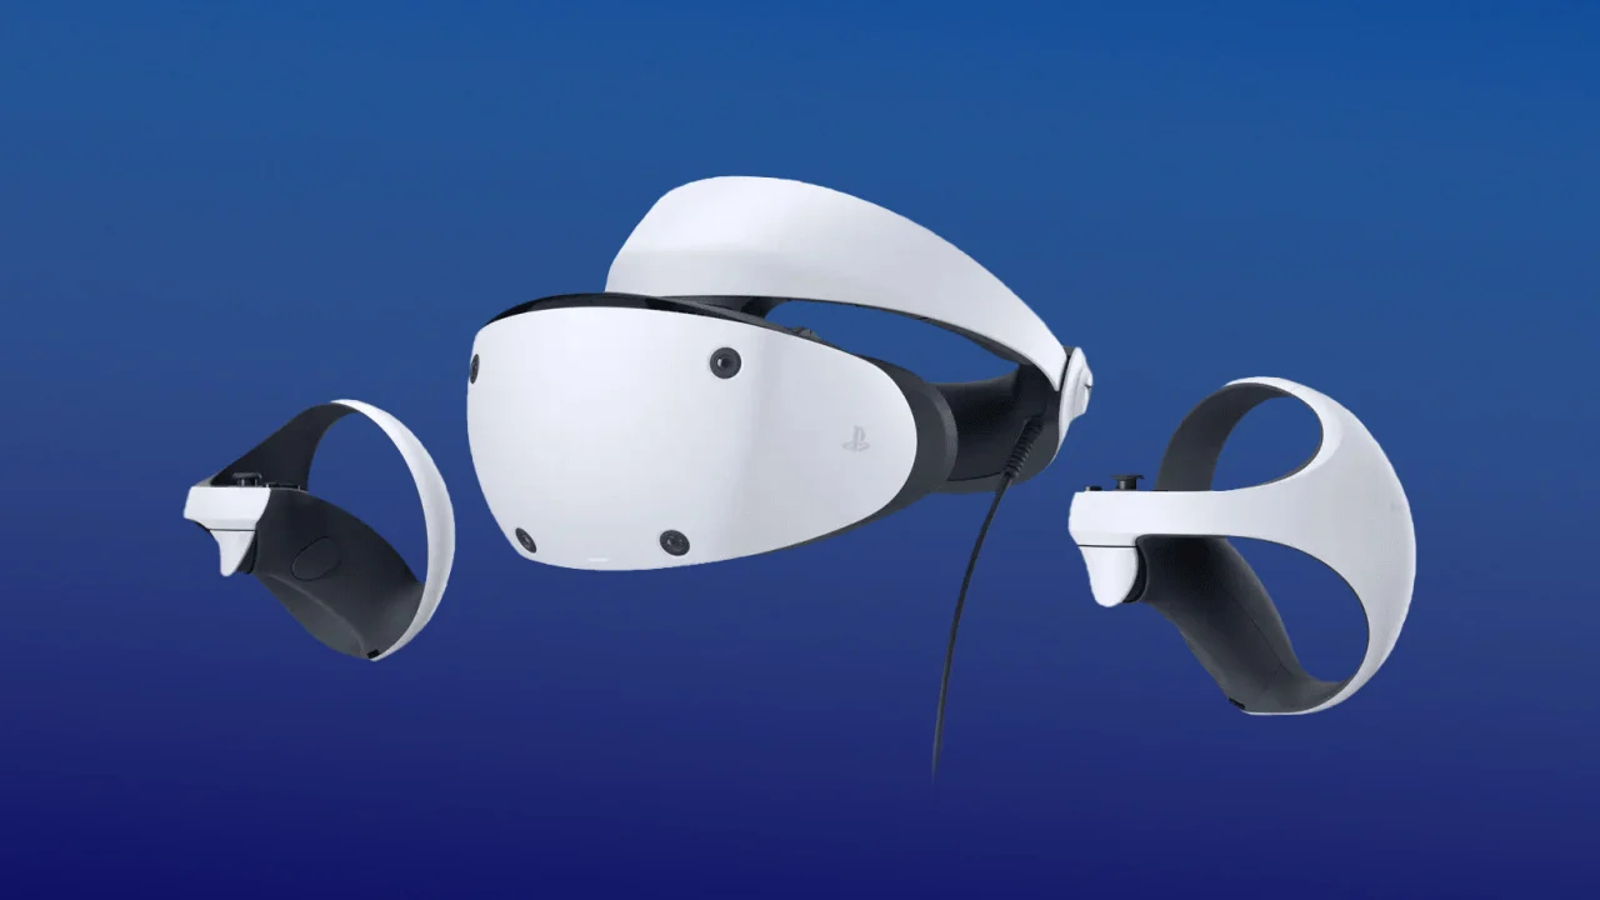 PlayStation VR 2 Will Arrive in February for $550 - CNET